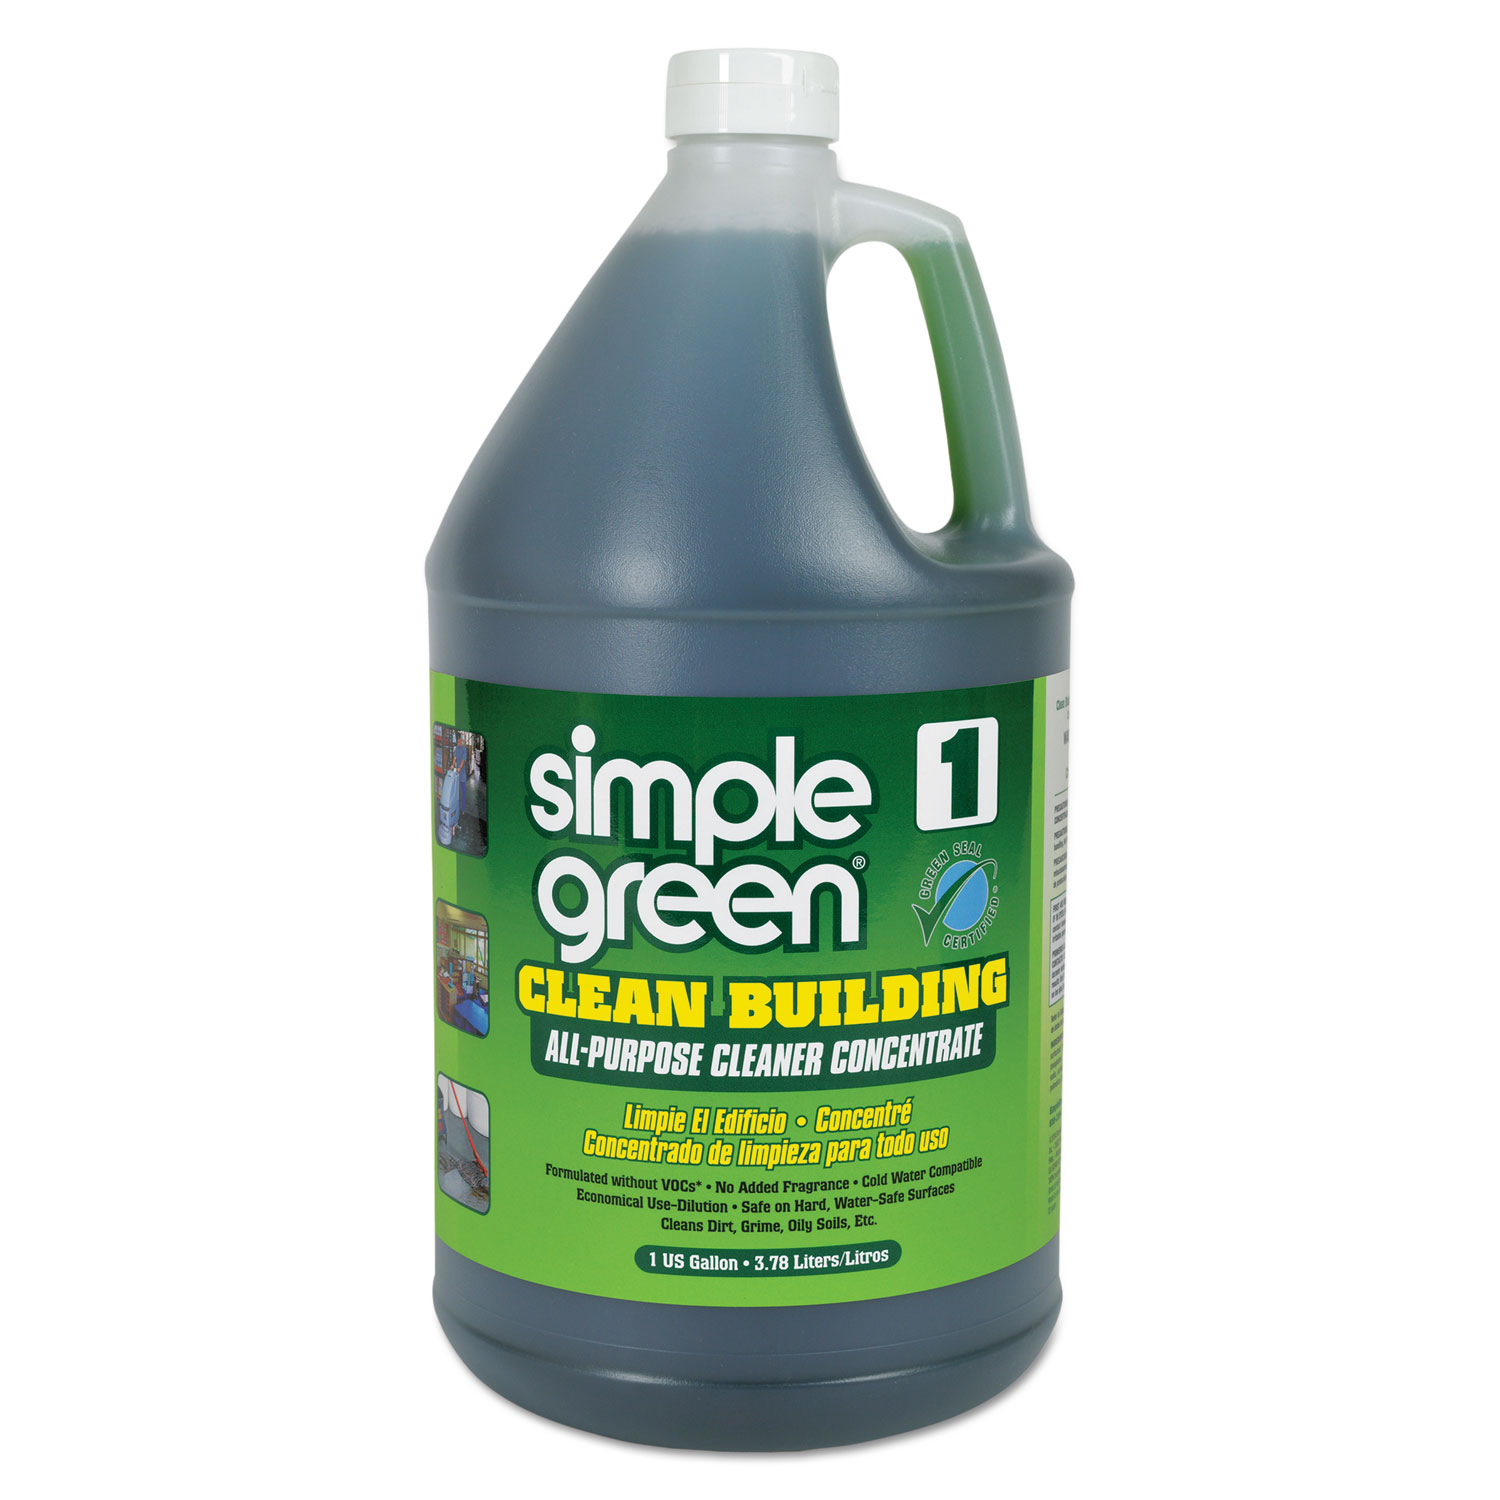  Simple Green 1210000211001 Clean Building All-Purpose Cleaner Concentrate, 1gal Bottle, 2 per Carton (SMP11001CT) 